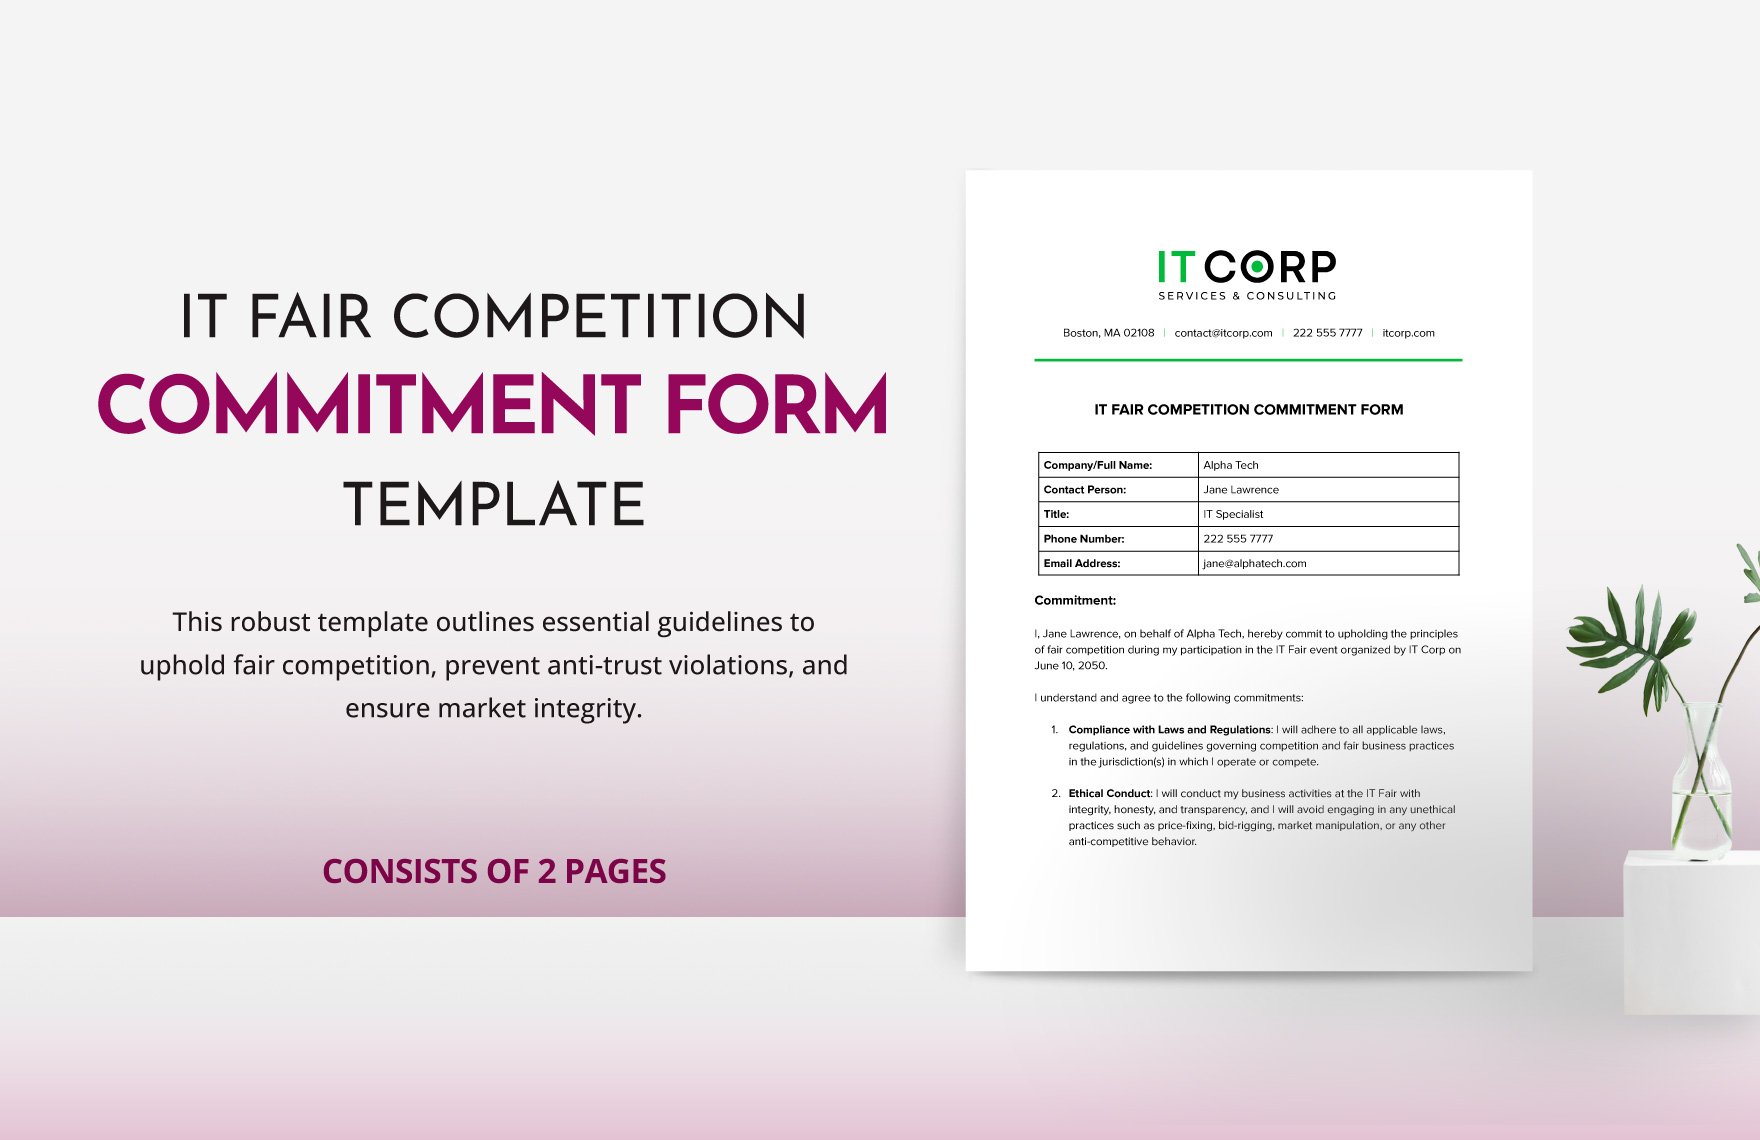 IT Fair Competition Commitment Form Template